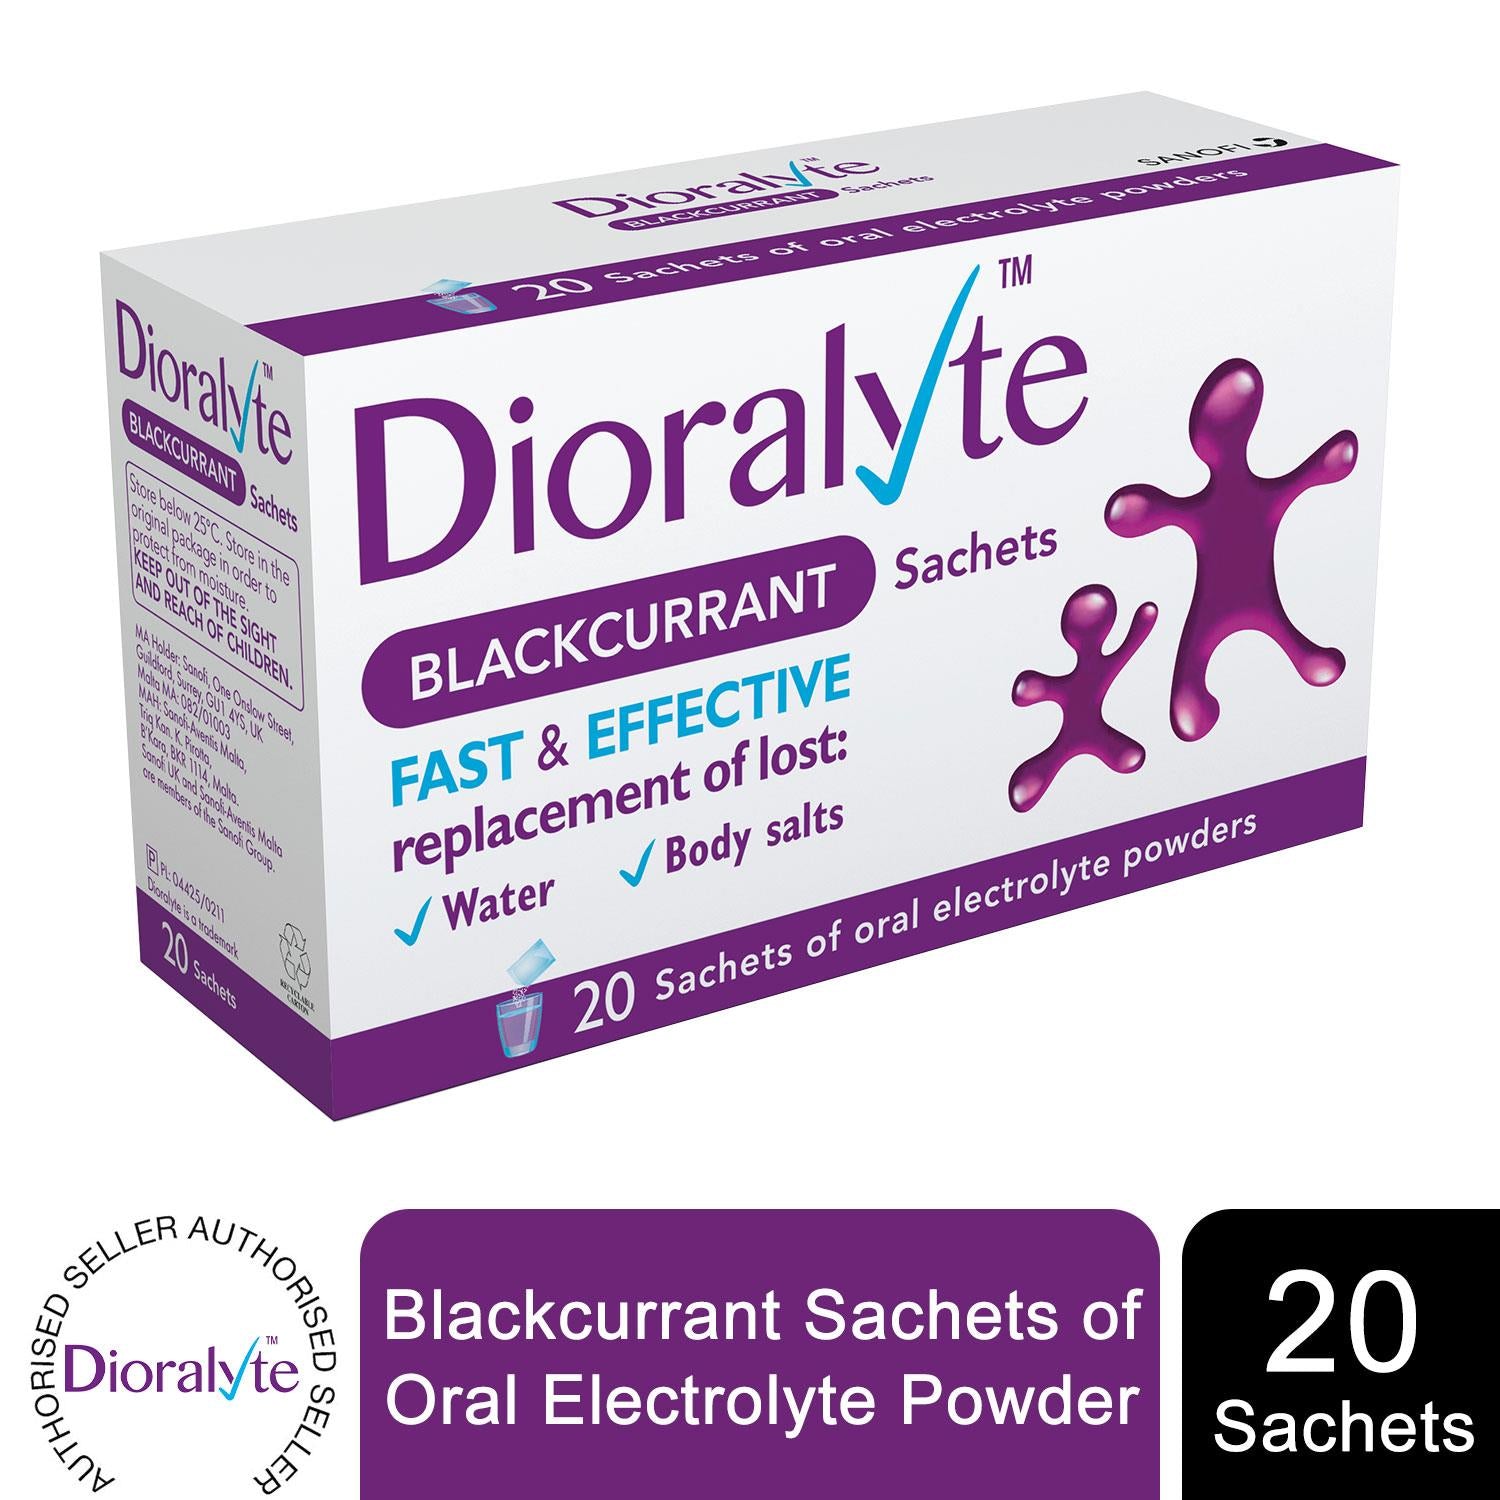 Dioralyte Blackcurrant 20 Pack